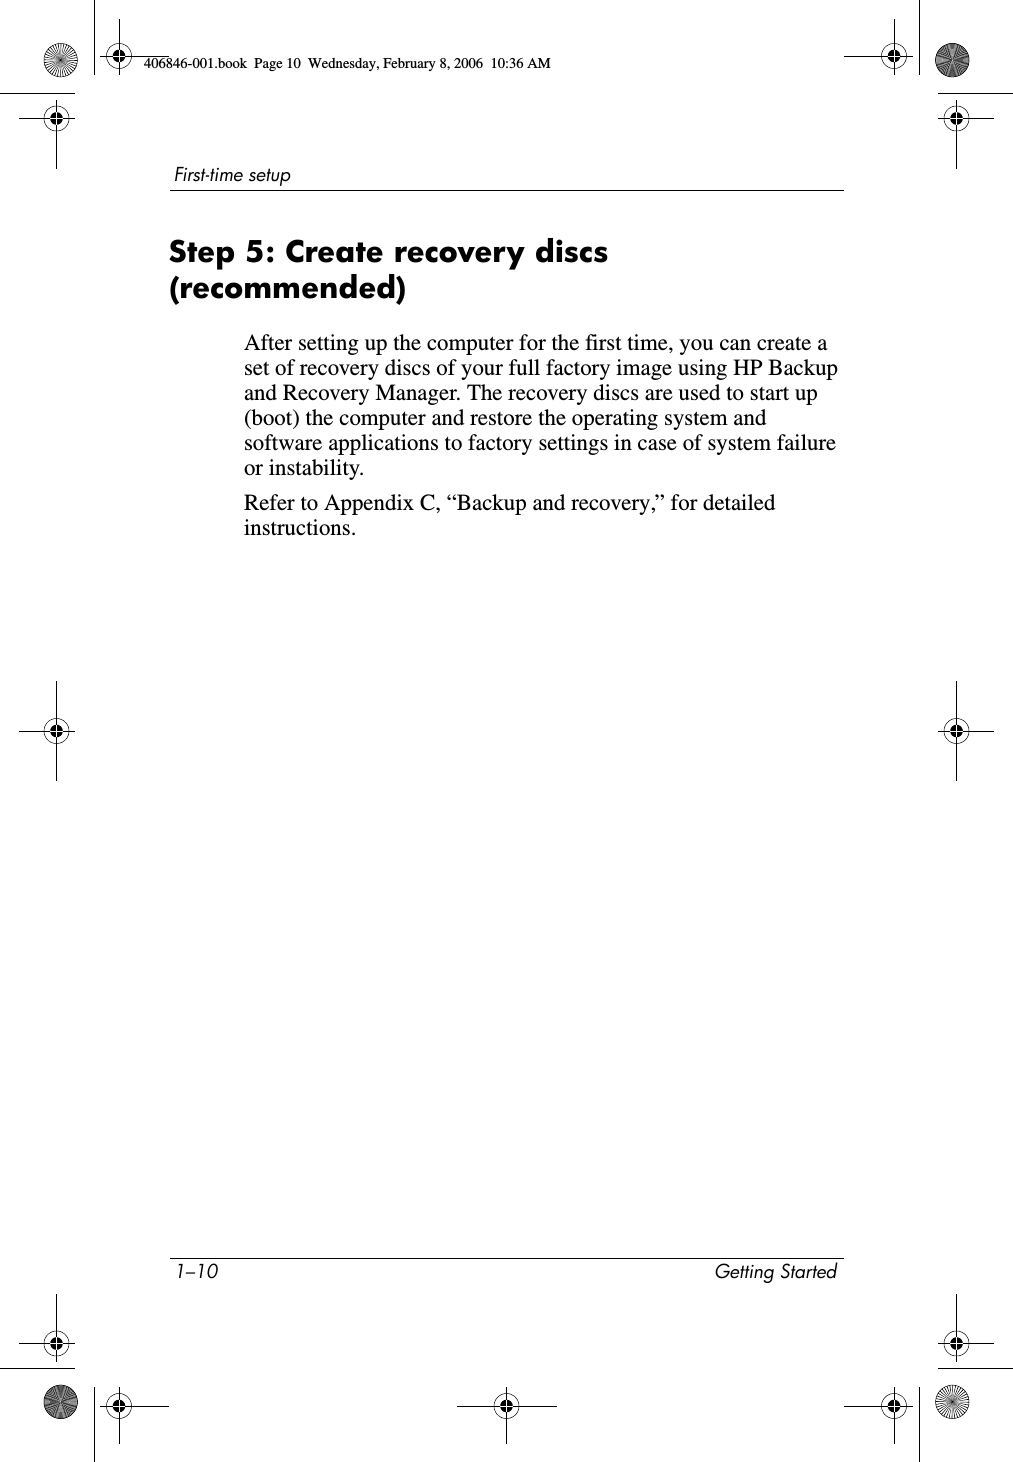 1–10 Getting StartedFirst-time setupStep 5: Create recovery discs (recommended)After setting up the computer for the first time, you can create a set of recovery discs of your full factory image using HP Backup and Recovery Manager. The recovery discs are used to start up (boot) the computer and restore the operating system and software applications to factory settings in case of system failure or instability.Refer to Appendix C, “Backup and recovery,” for detailed instructions.406846-001.book  Page 10  Wednesday, February 8, 2006  10:36 AM